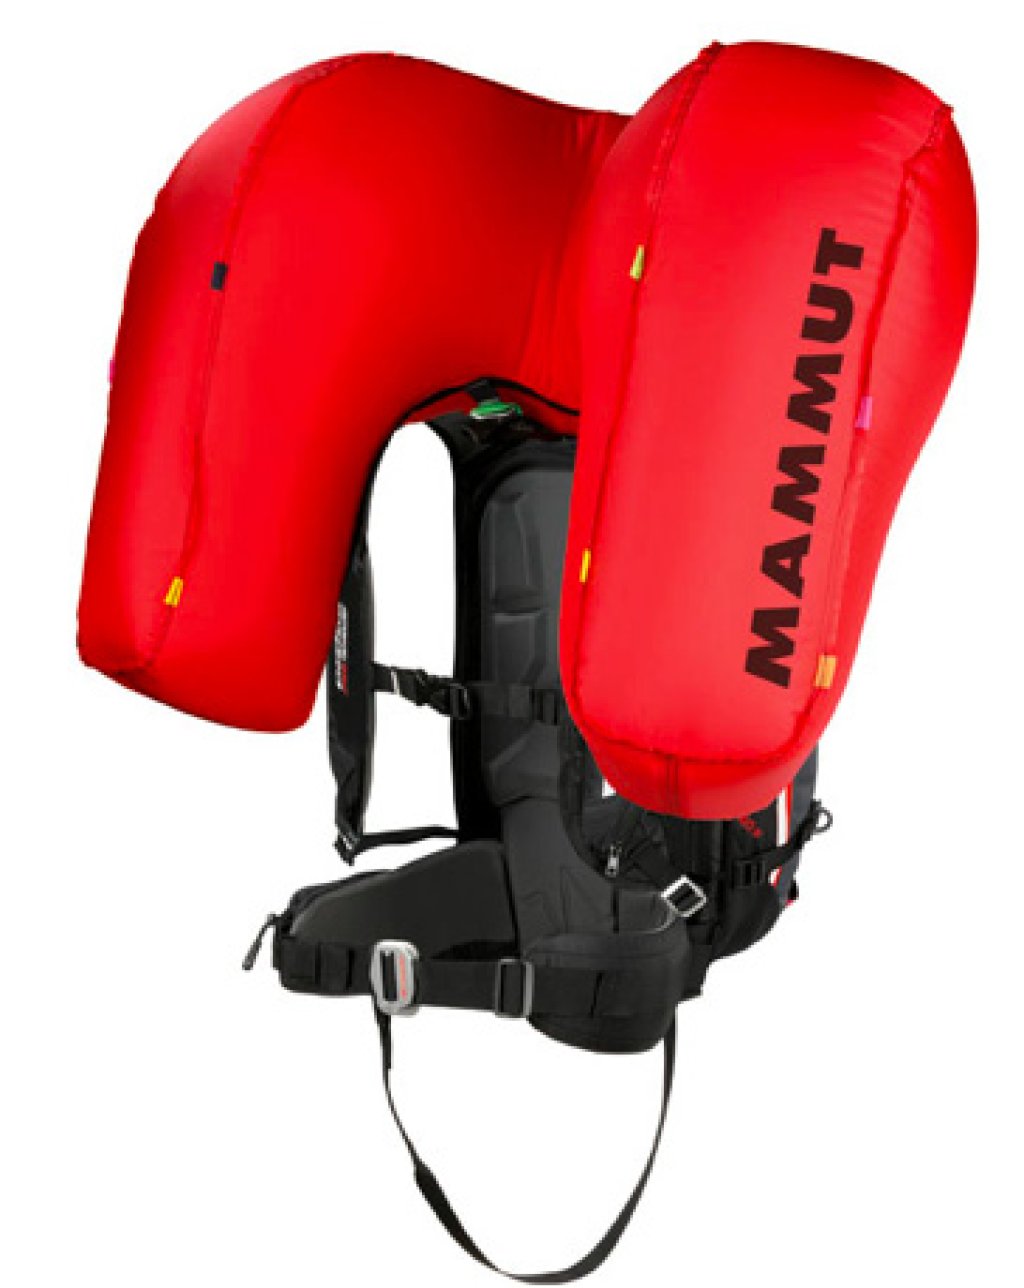 The Protection Airbag System from Mammut and Snowpulse